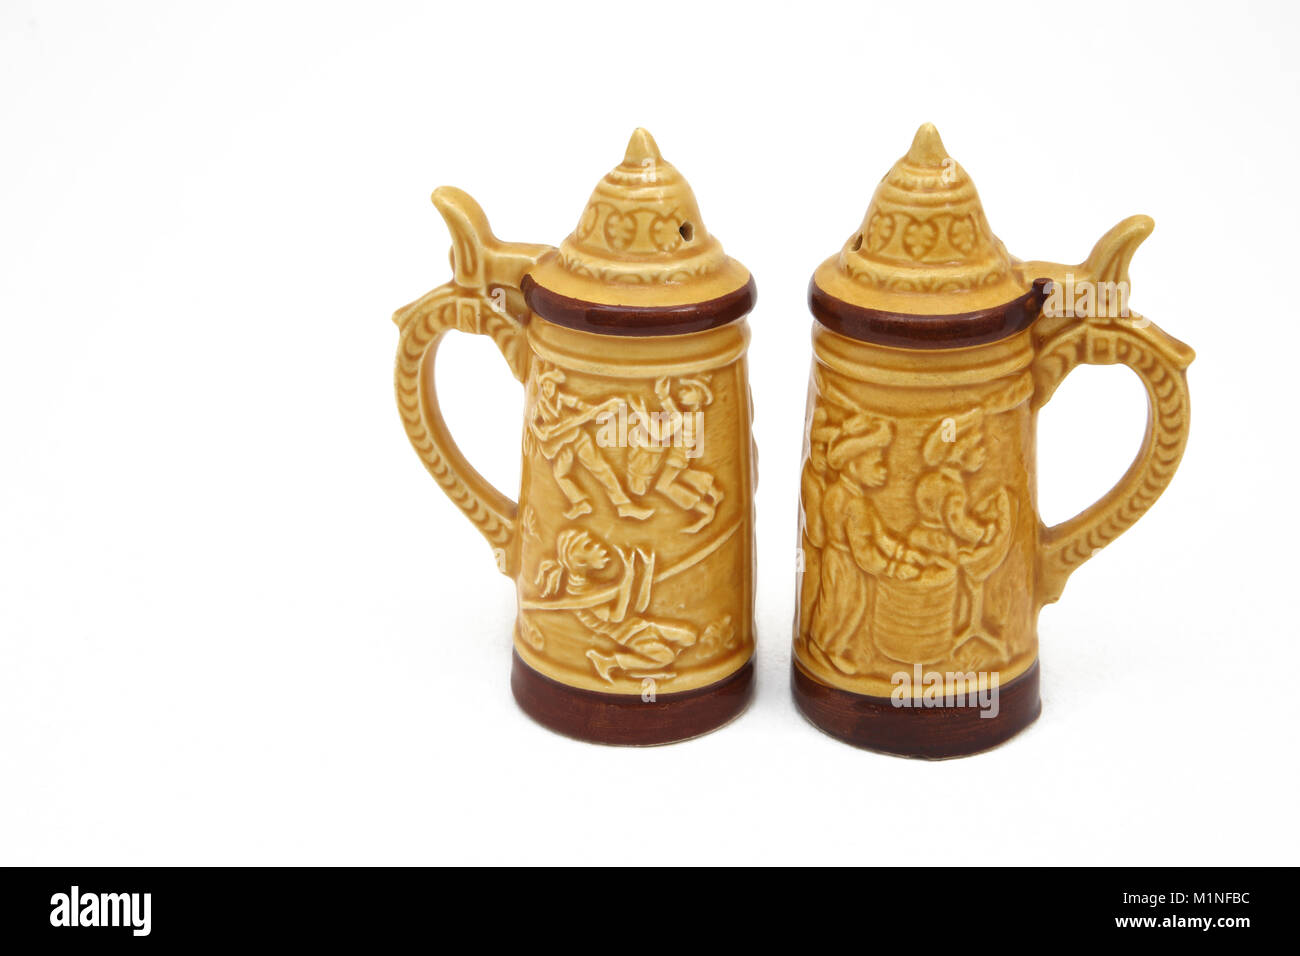 Stein Salt and Pepper Shakers made in Japan Decorated with the Trinidad Limbo Dance and Steel Drums Stock Photo